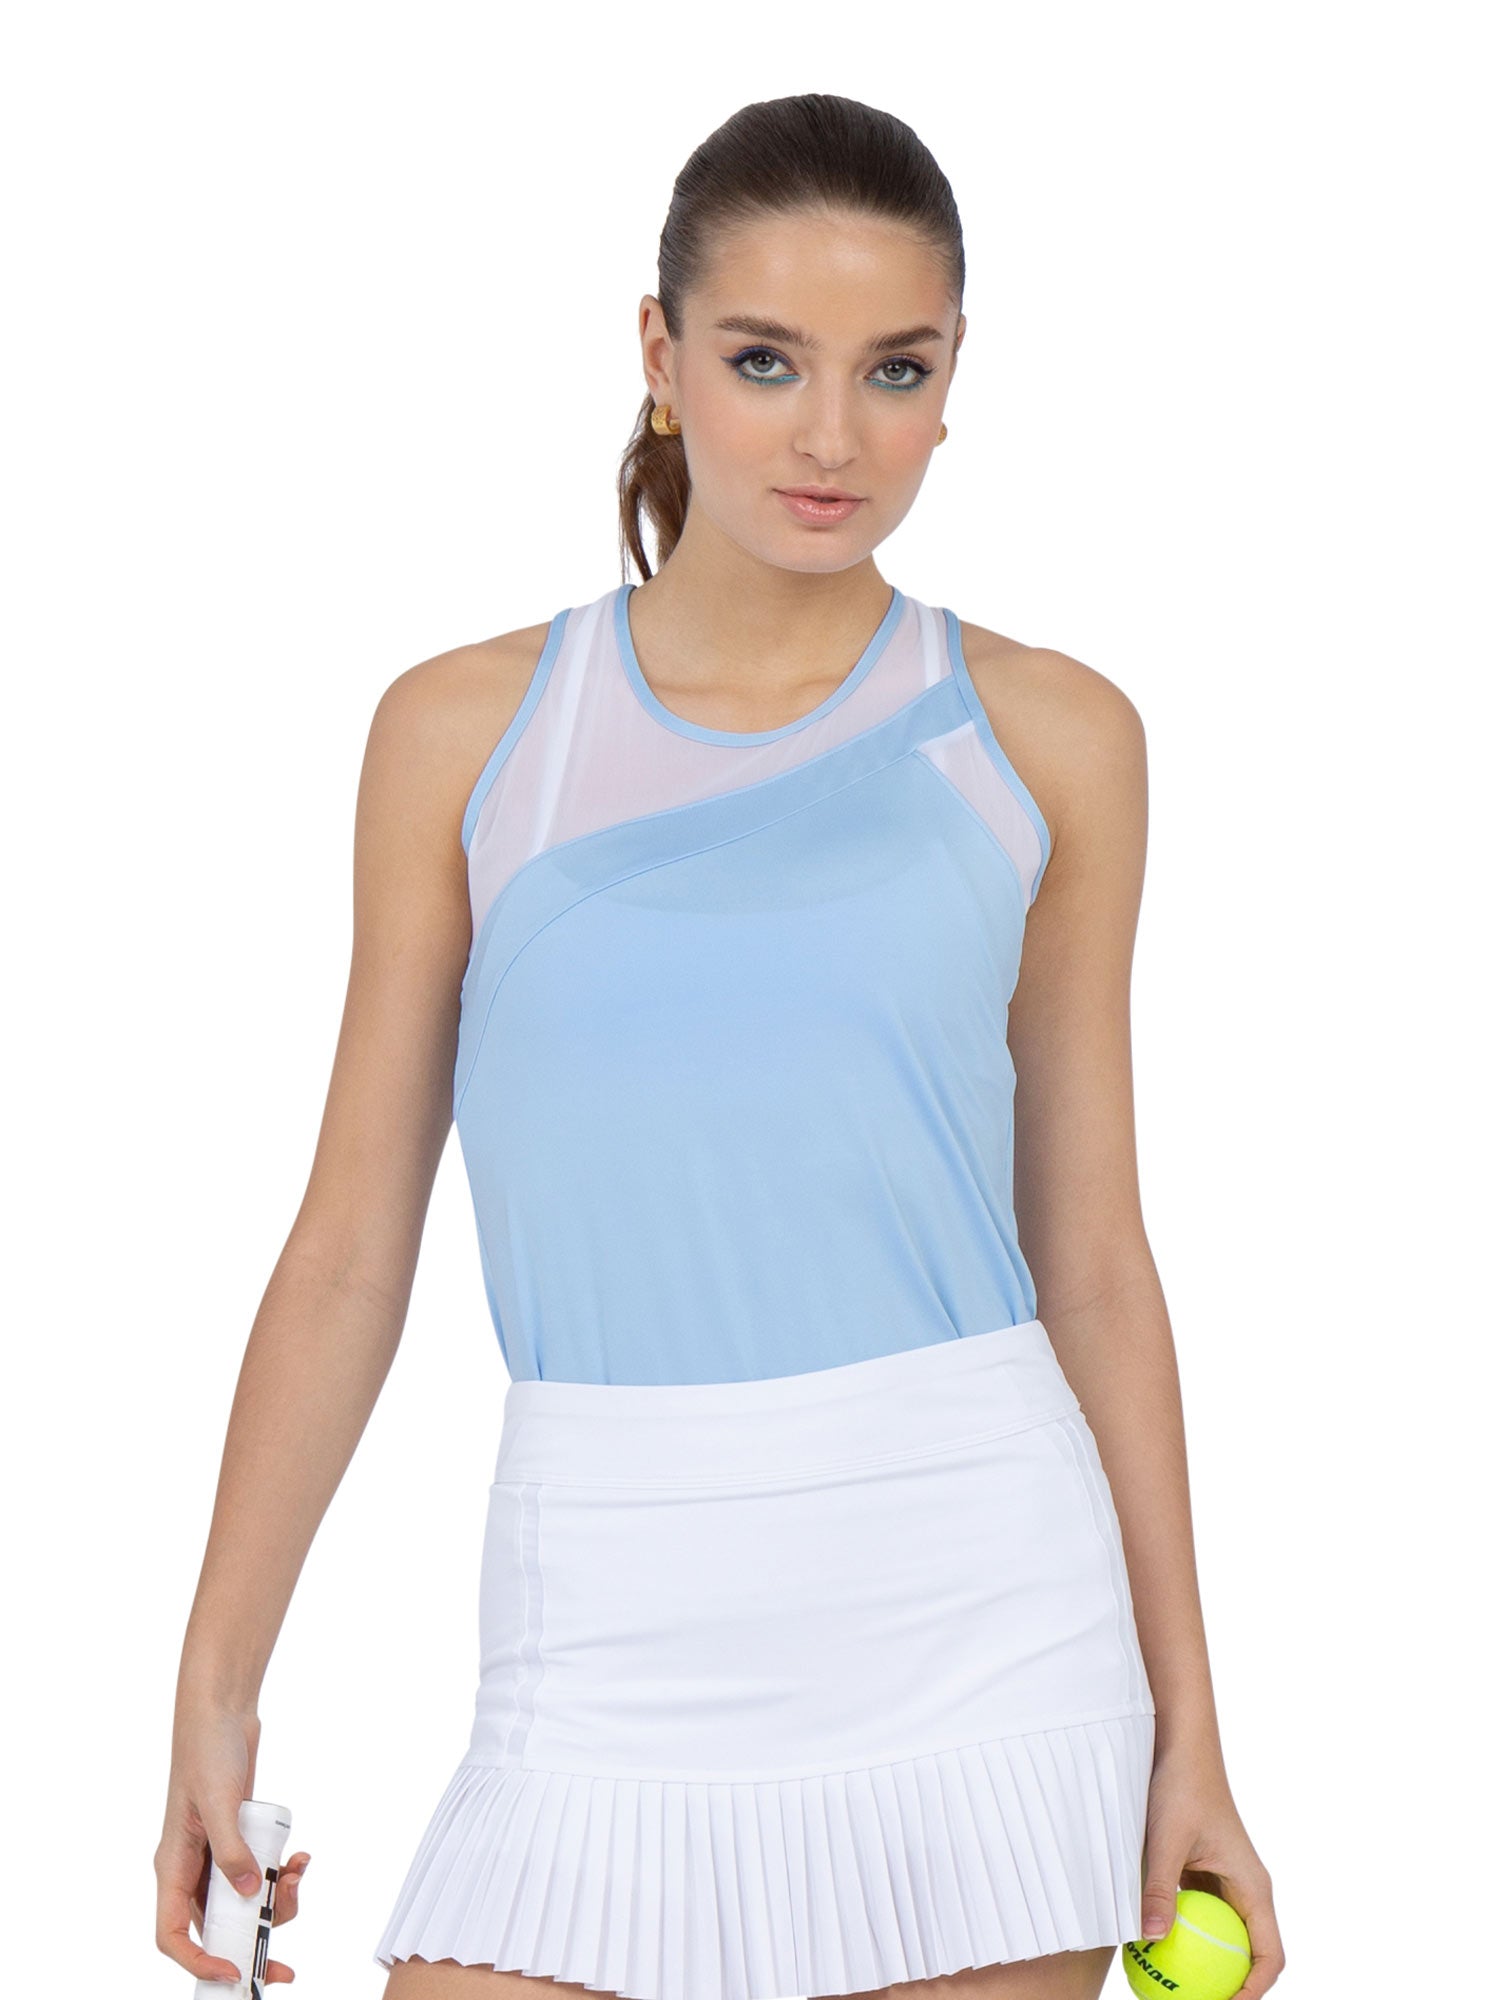 Front view of model wearing the Emma tank in bluebell by inPhorm NYC with her hands at her side holding a tennis ball